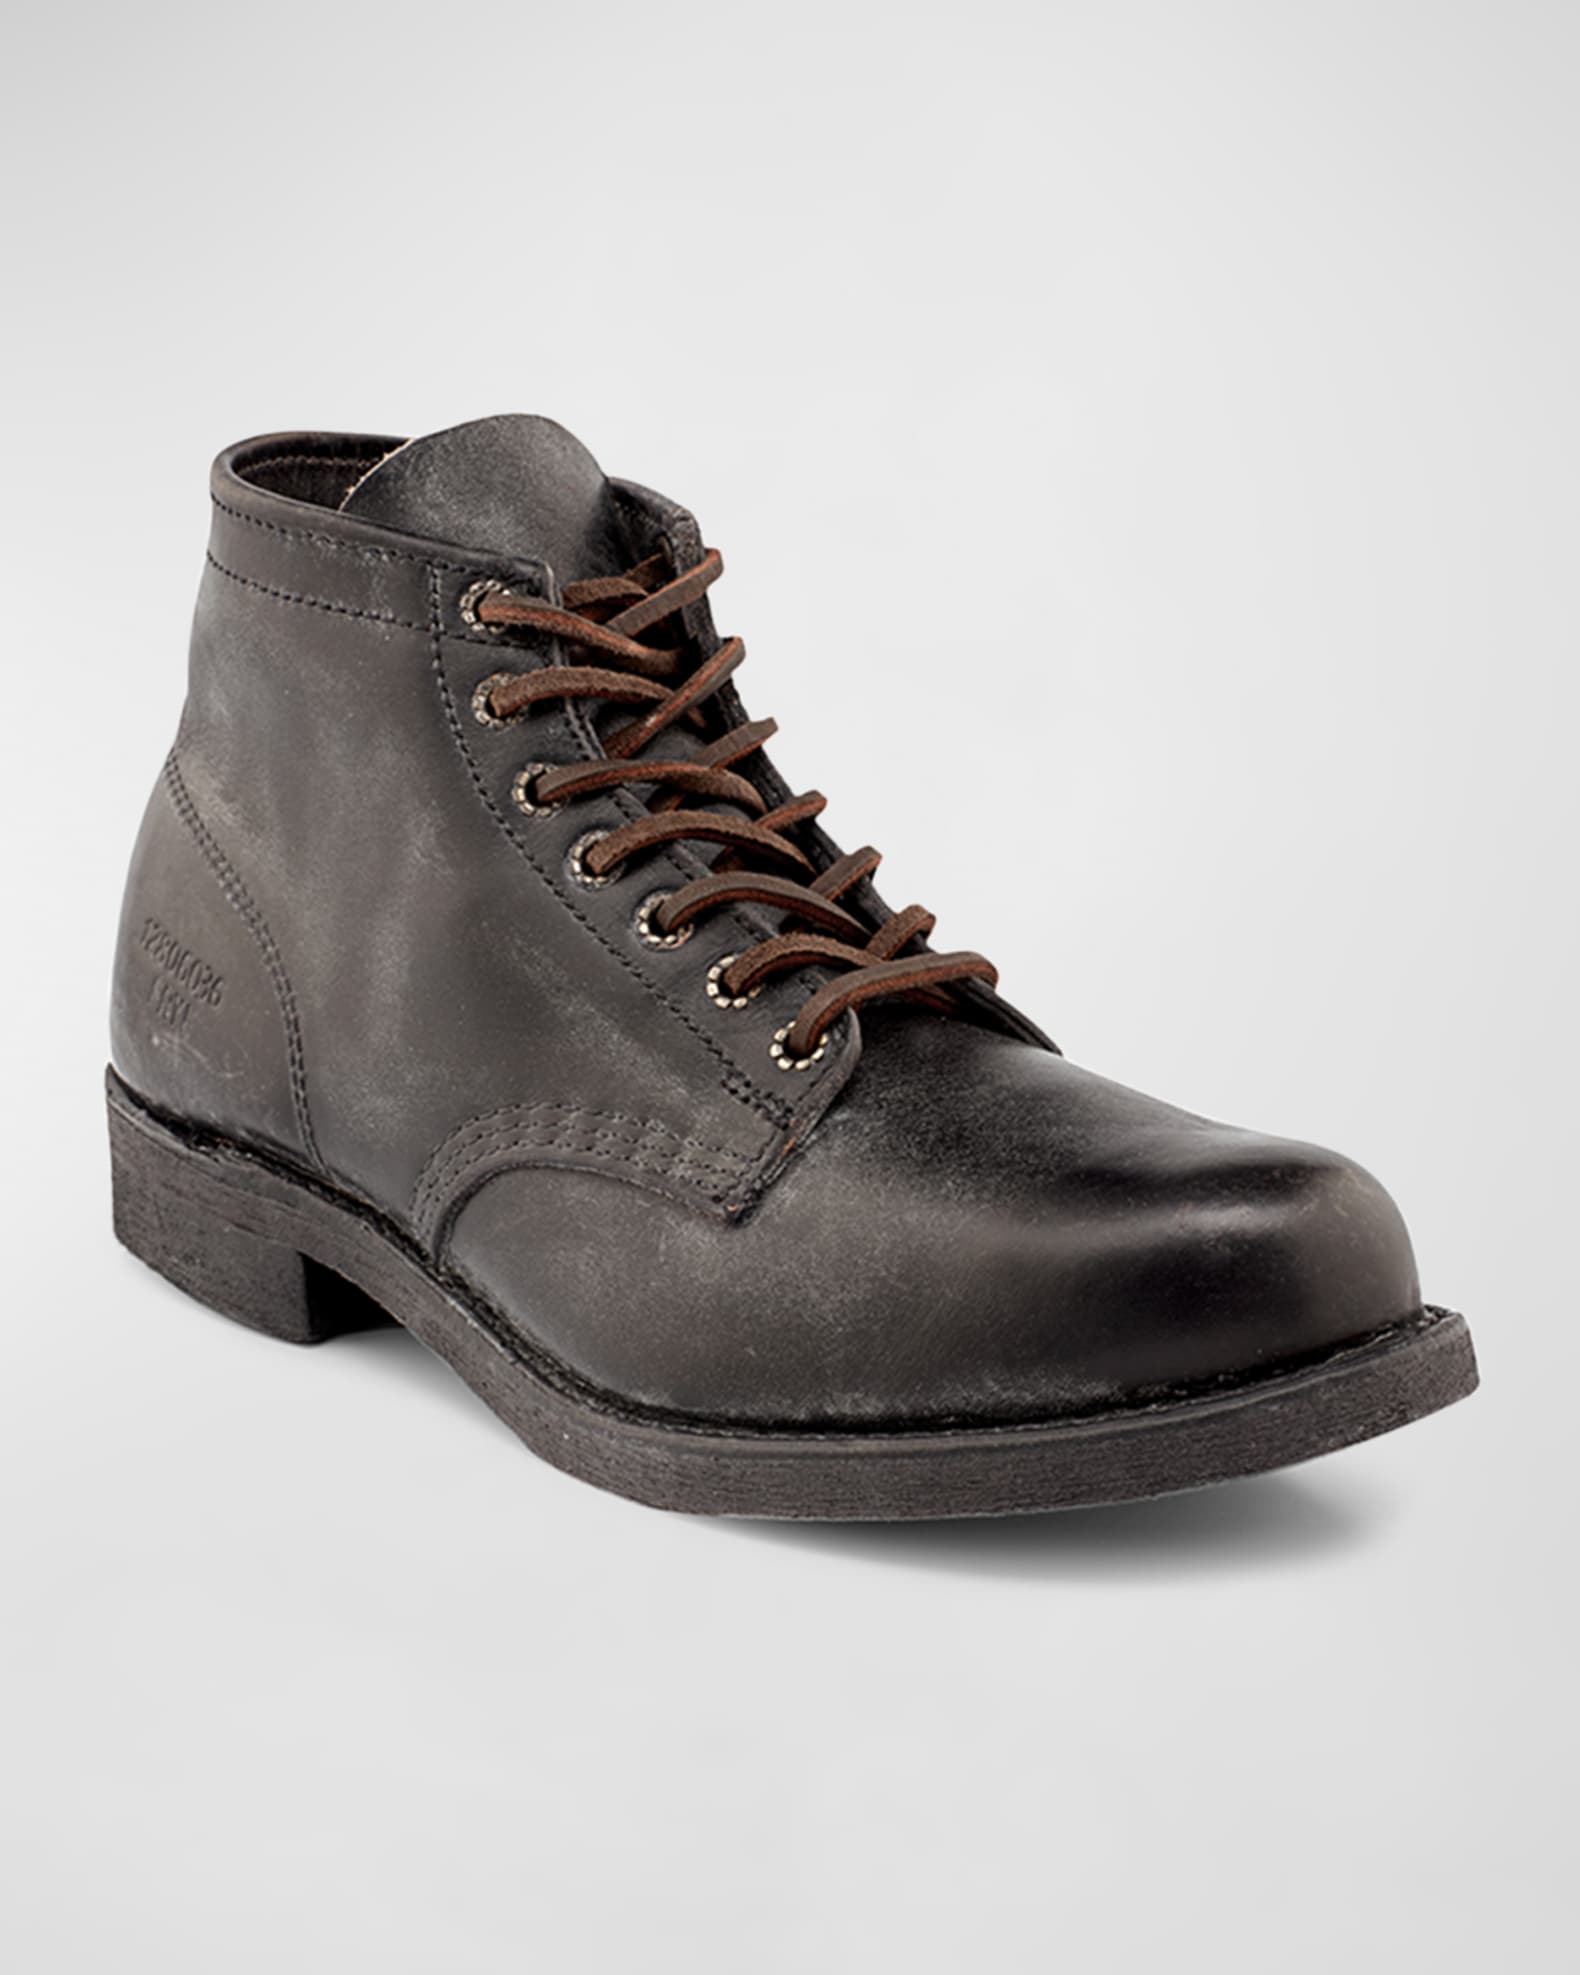 Frye Men's Prison Lace-Up Leather Ankle Boots | Neiman Marcus